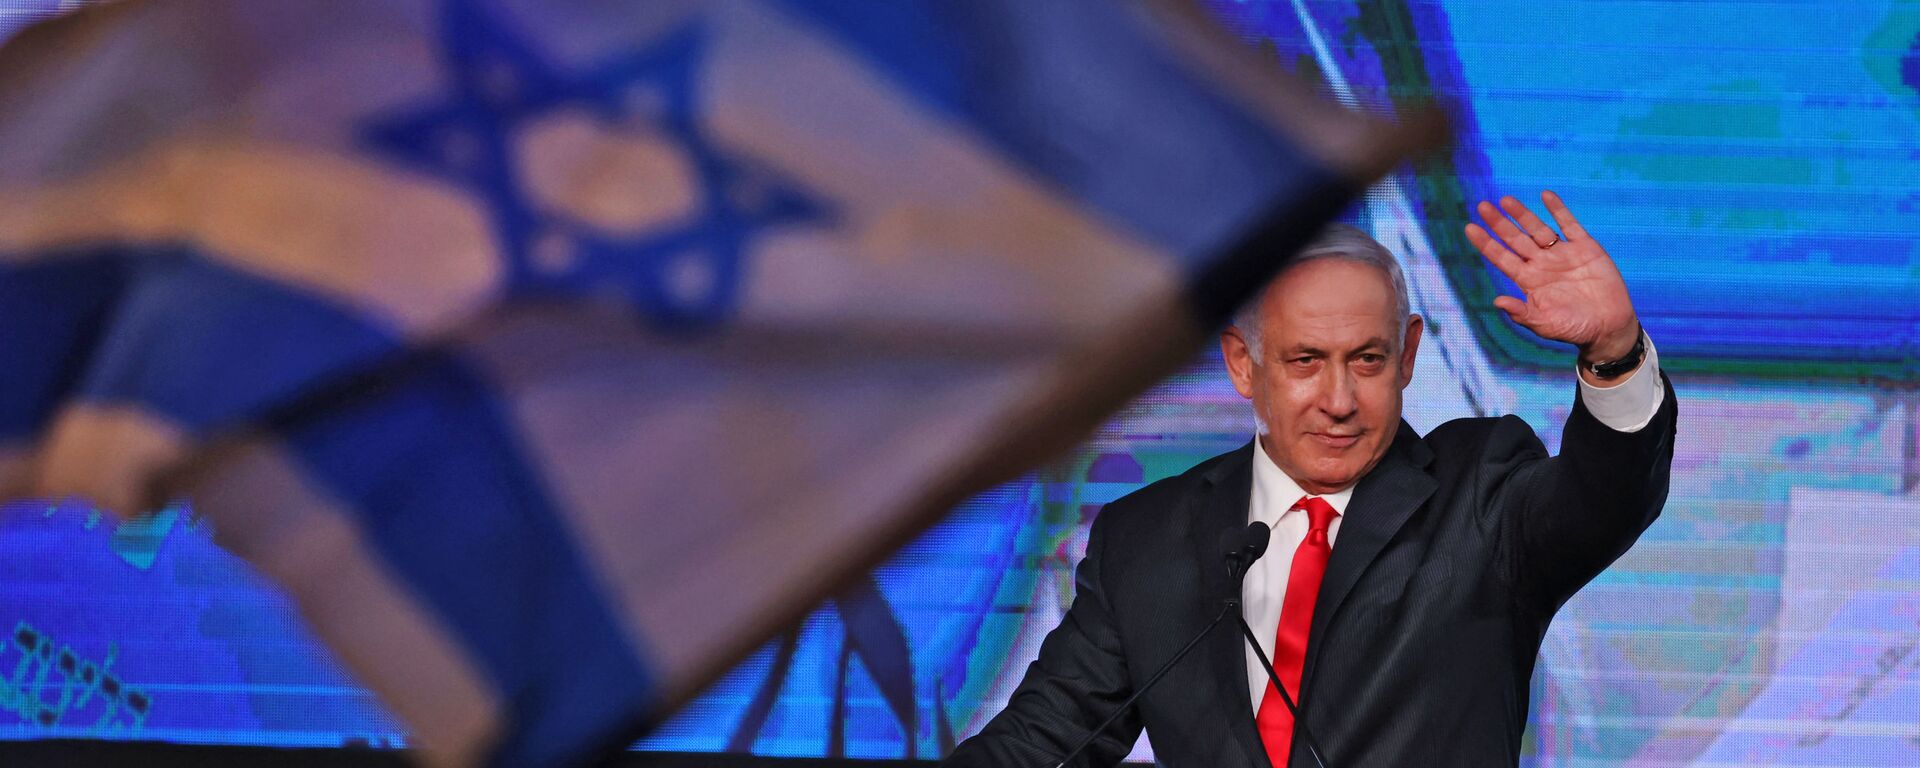 In this file photo taken on 24 March 2021, Israeli Prime Minister Benjamin Netanyahu, leader of the Likud party, addresses supporters at the party campaign headquarters in Jerusalem after the end of voting in the fourth national election in two years. - Sputnik International, 1920, 06.04.2021